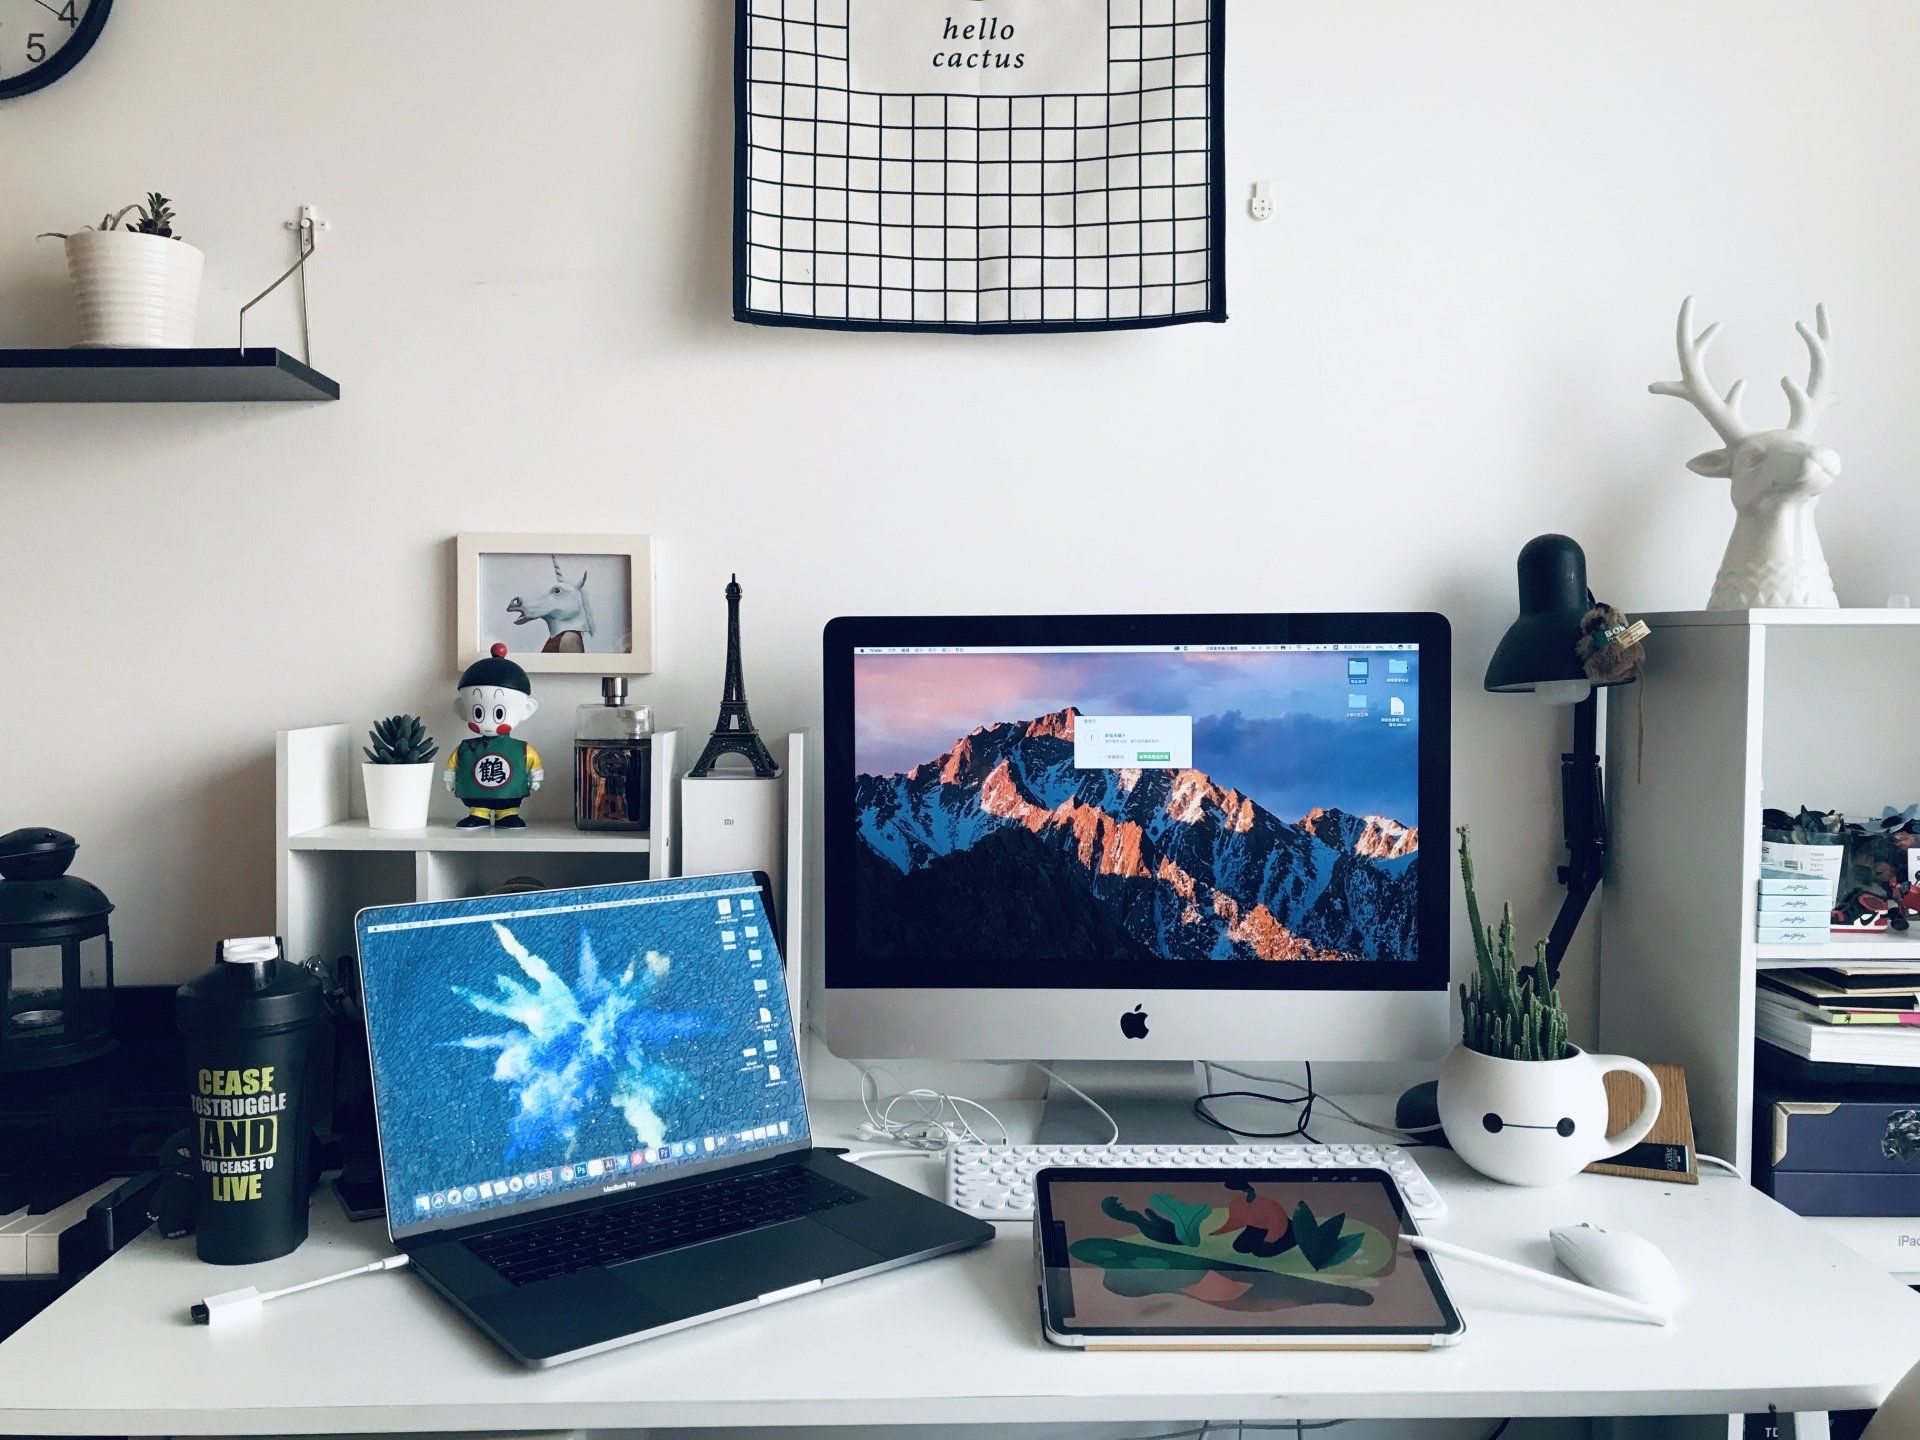 Image of a home office setup with a laptop and desk accessories, symbolizing remote work efficiency.